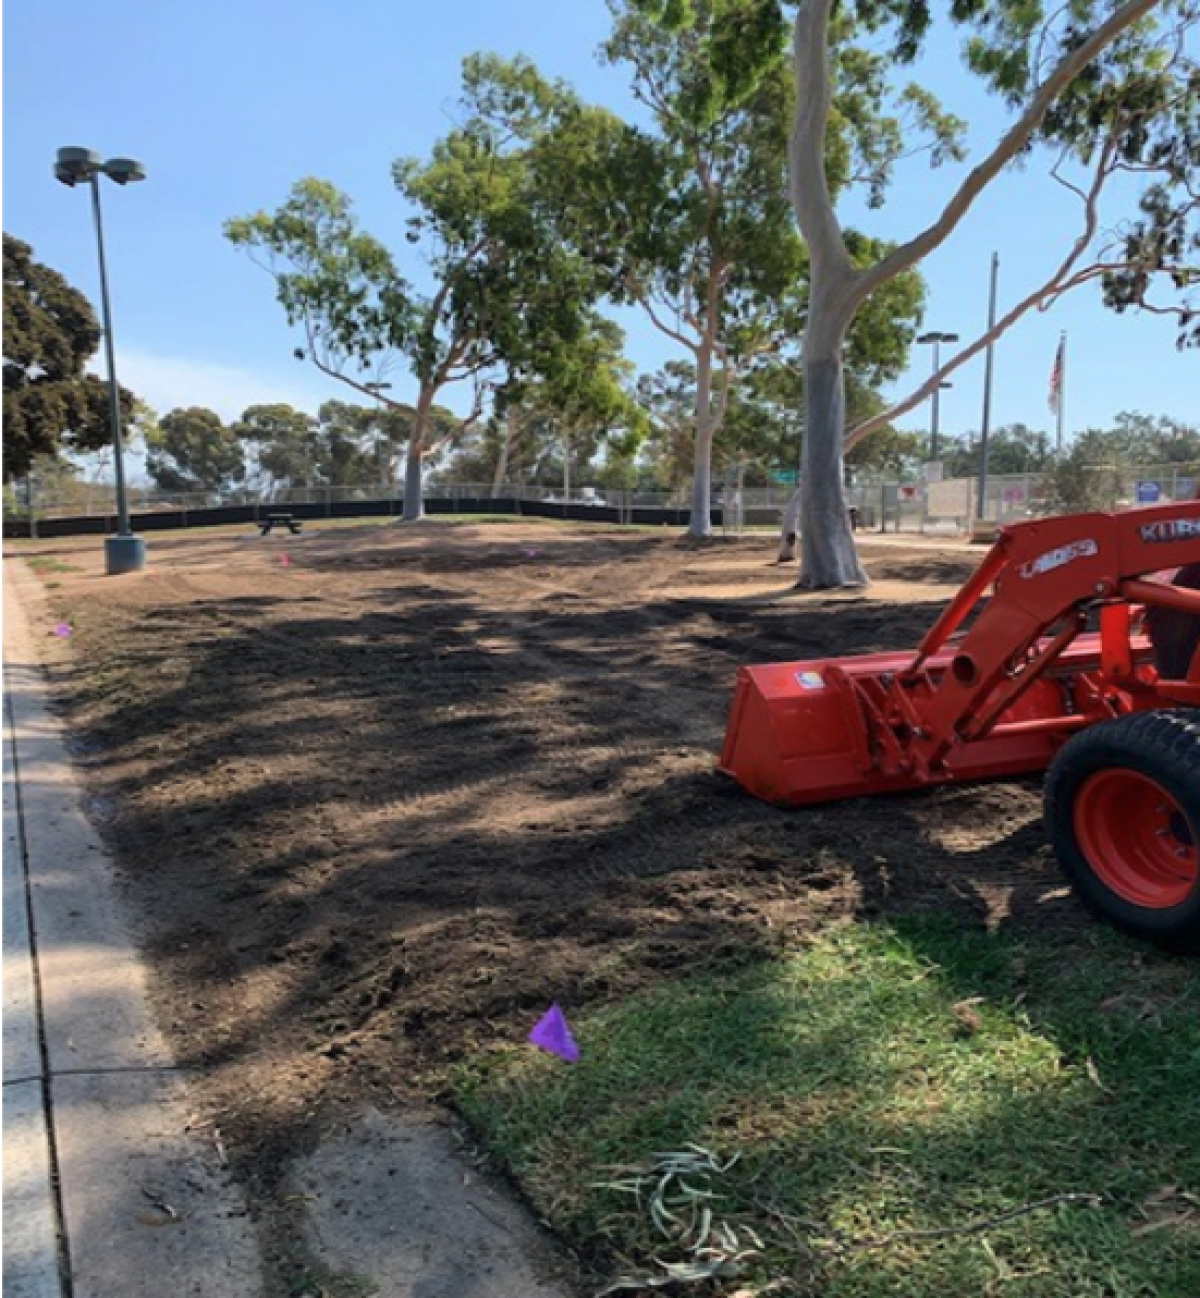 Costa Mesa officials announced Friday a plan to renovate 8,000 square feet of turf at the city's Bark Park began Wednesday.